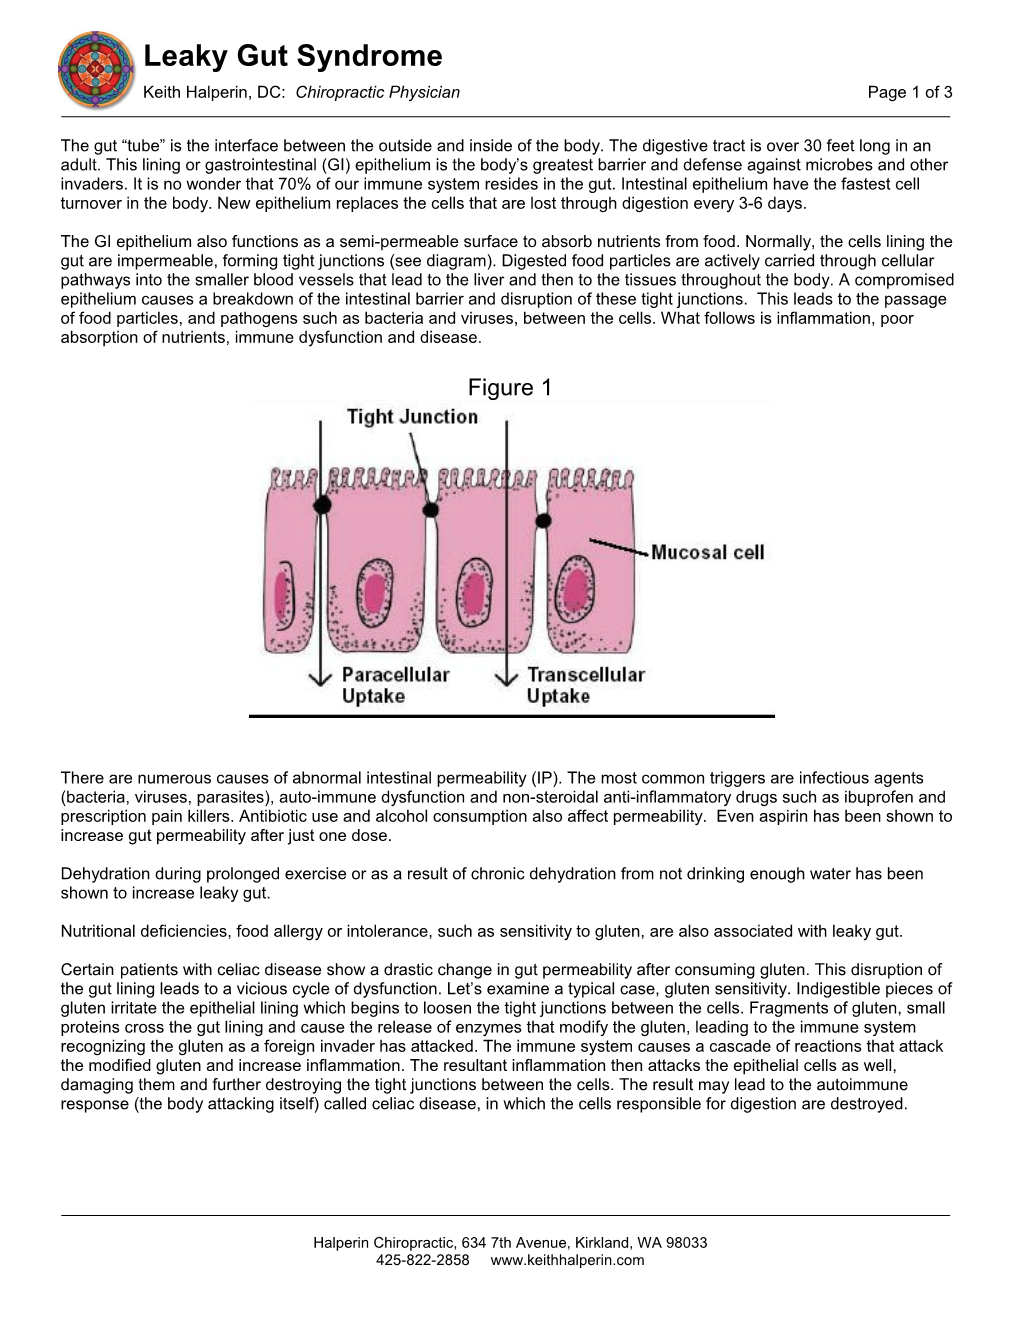 Leaky Gut Syndrome Keith Halperin, DC: Chiropractic Physician Page 1 of 3